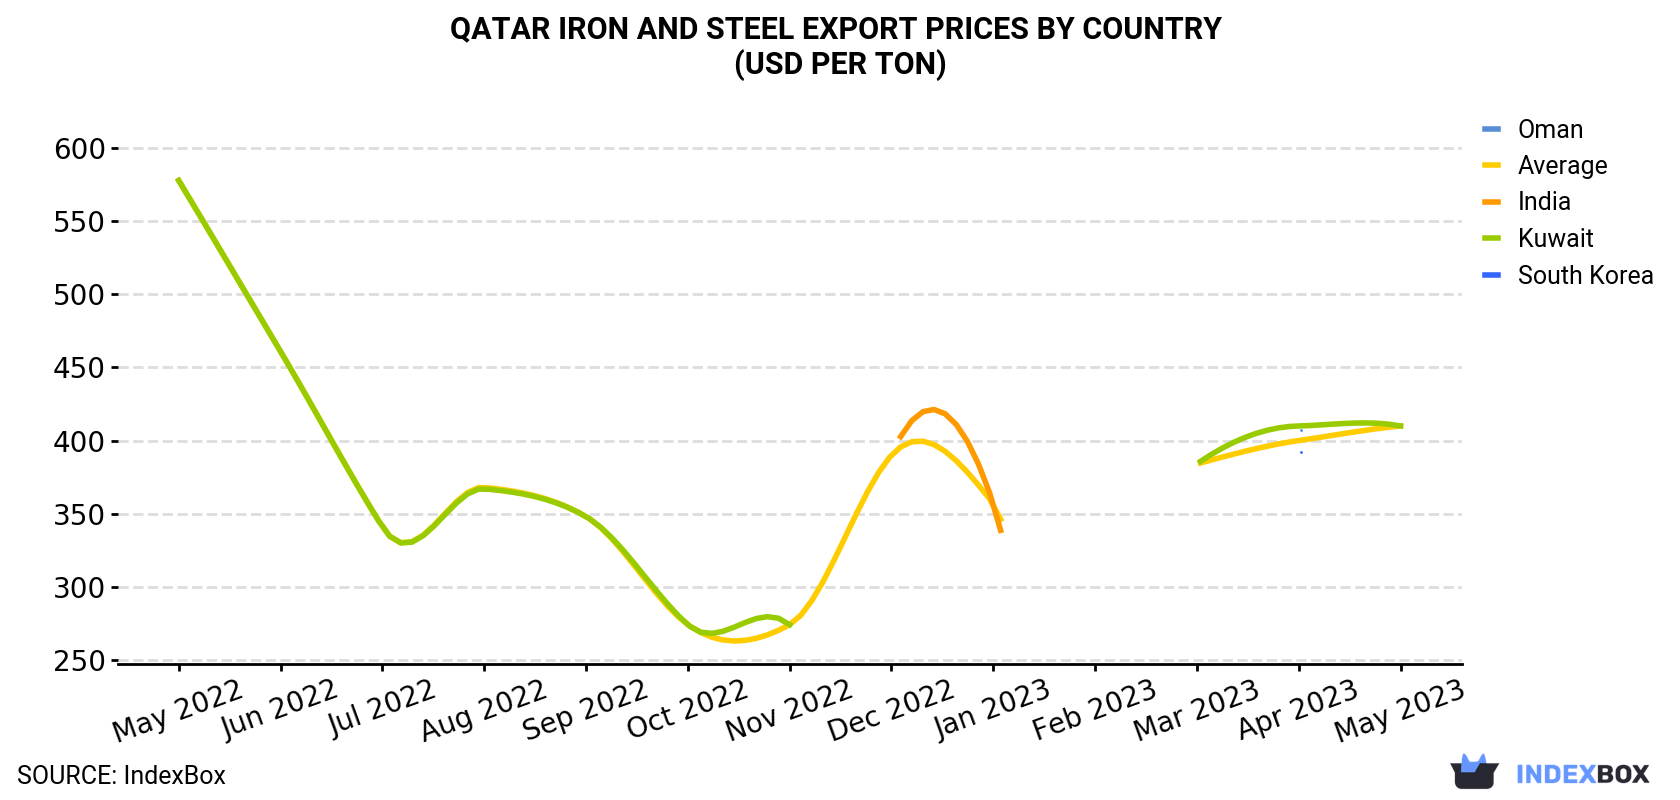 Qatar Iron and Steel Export Prices By Country (USD Per Ton)